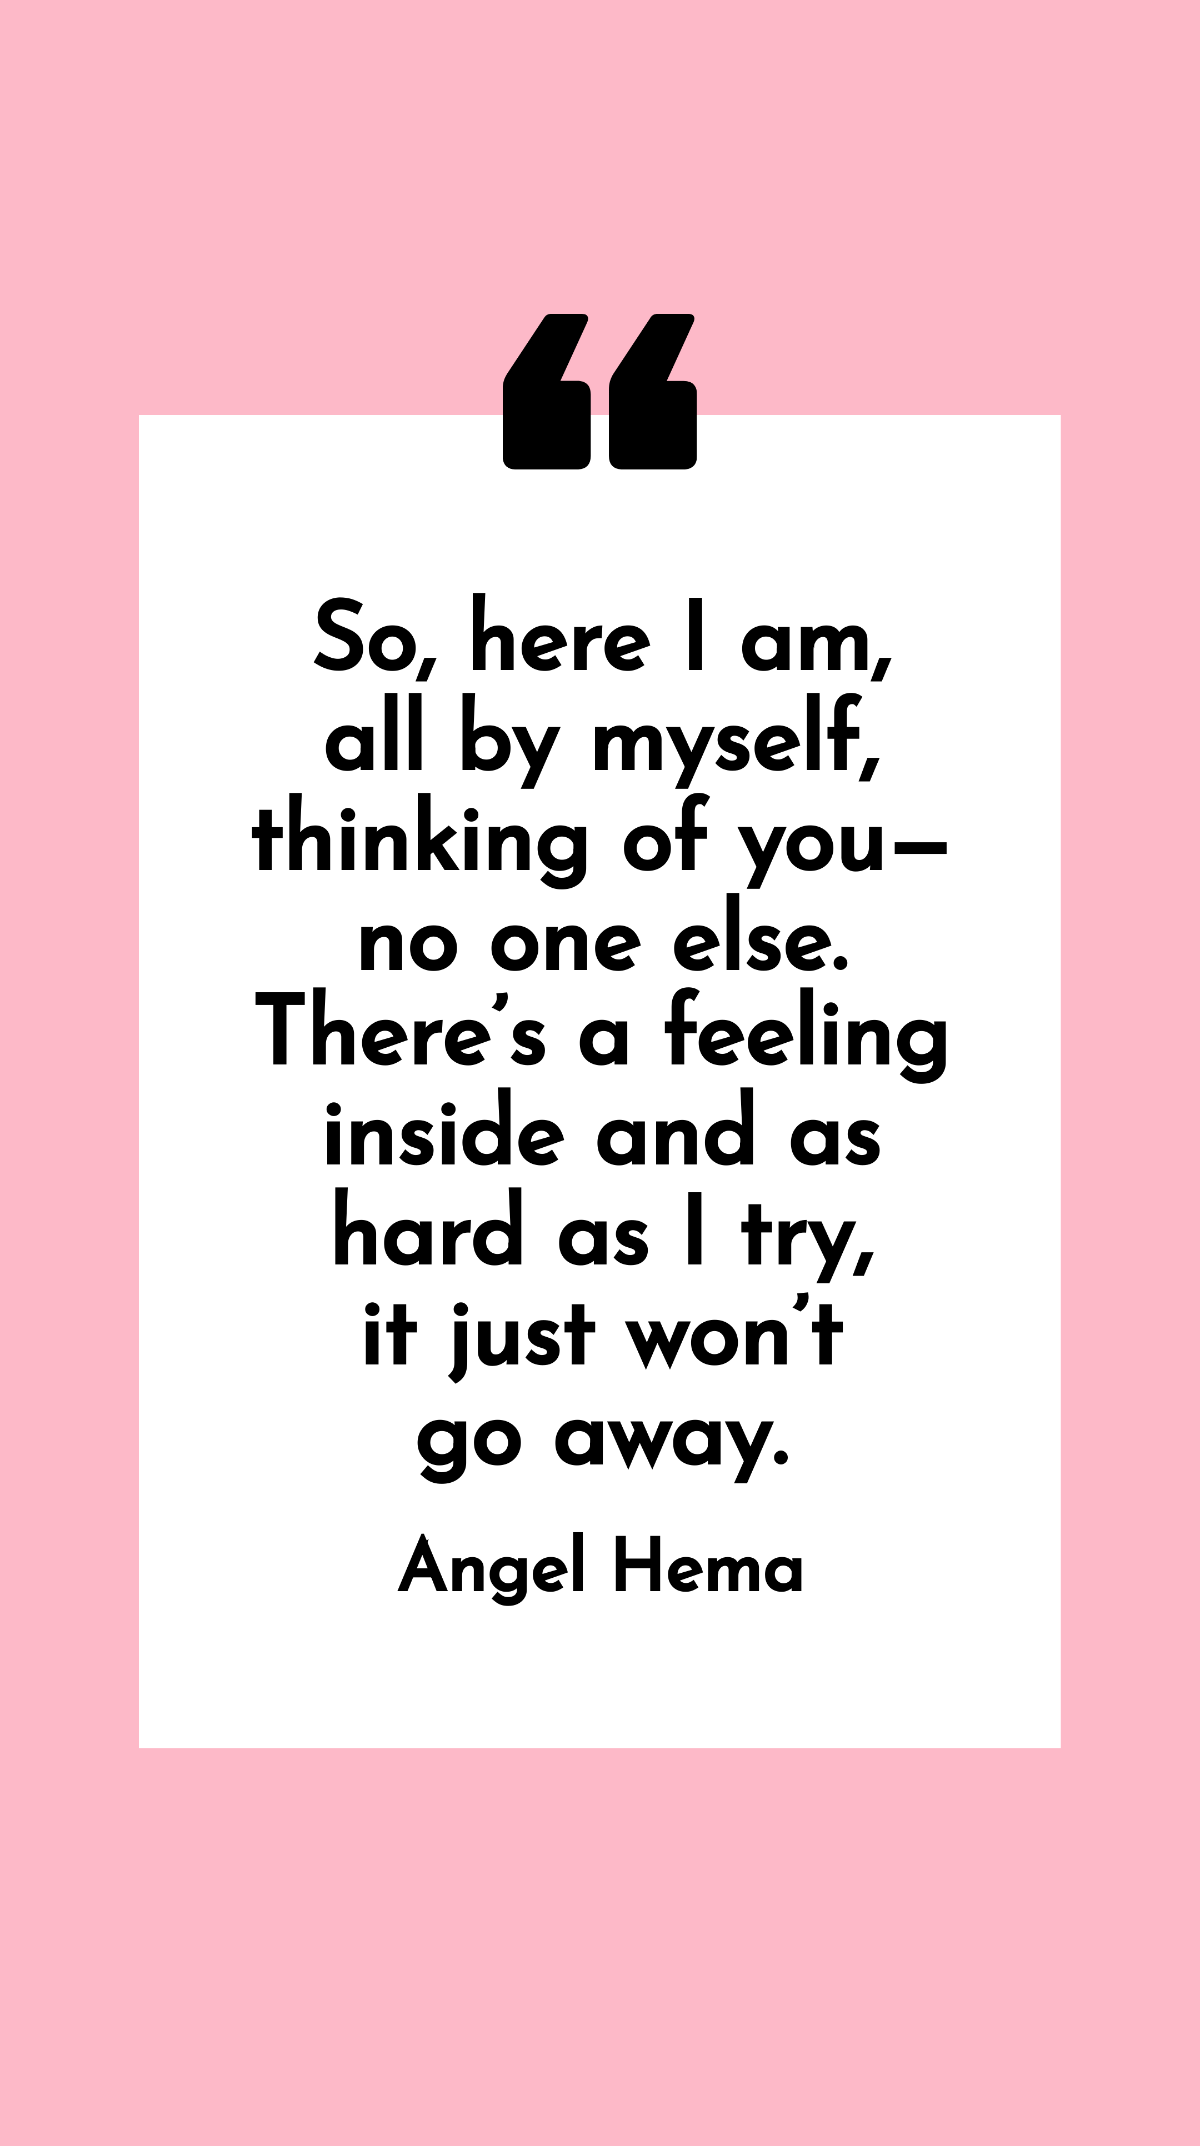 Angel Hema - So, here I am, all by myself, thinking of you – no one else. There’s a feeling inside and as hard as I try, it just won’t go away.